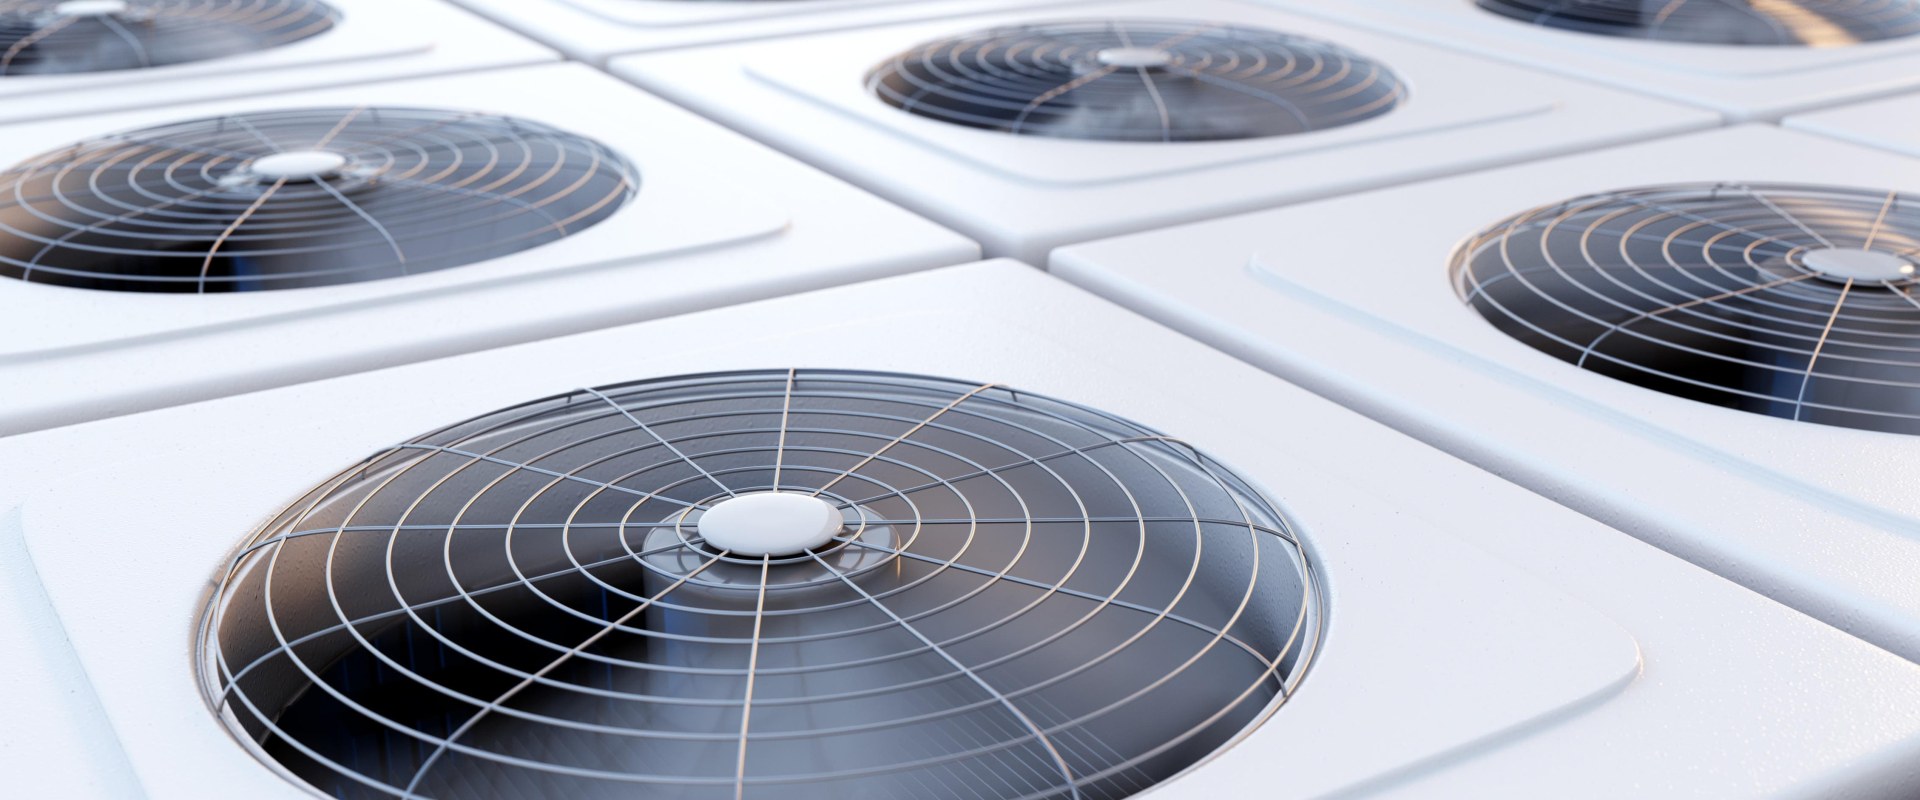 What Are the Major Changes Coming in 2023 for HVAC Units?